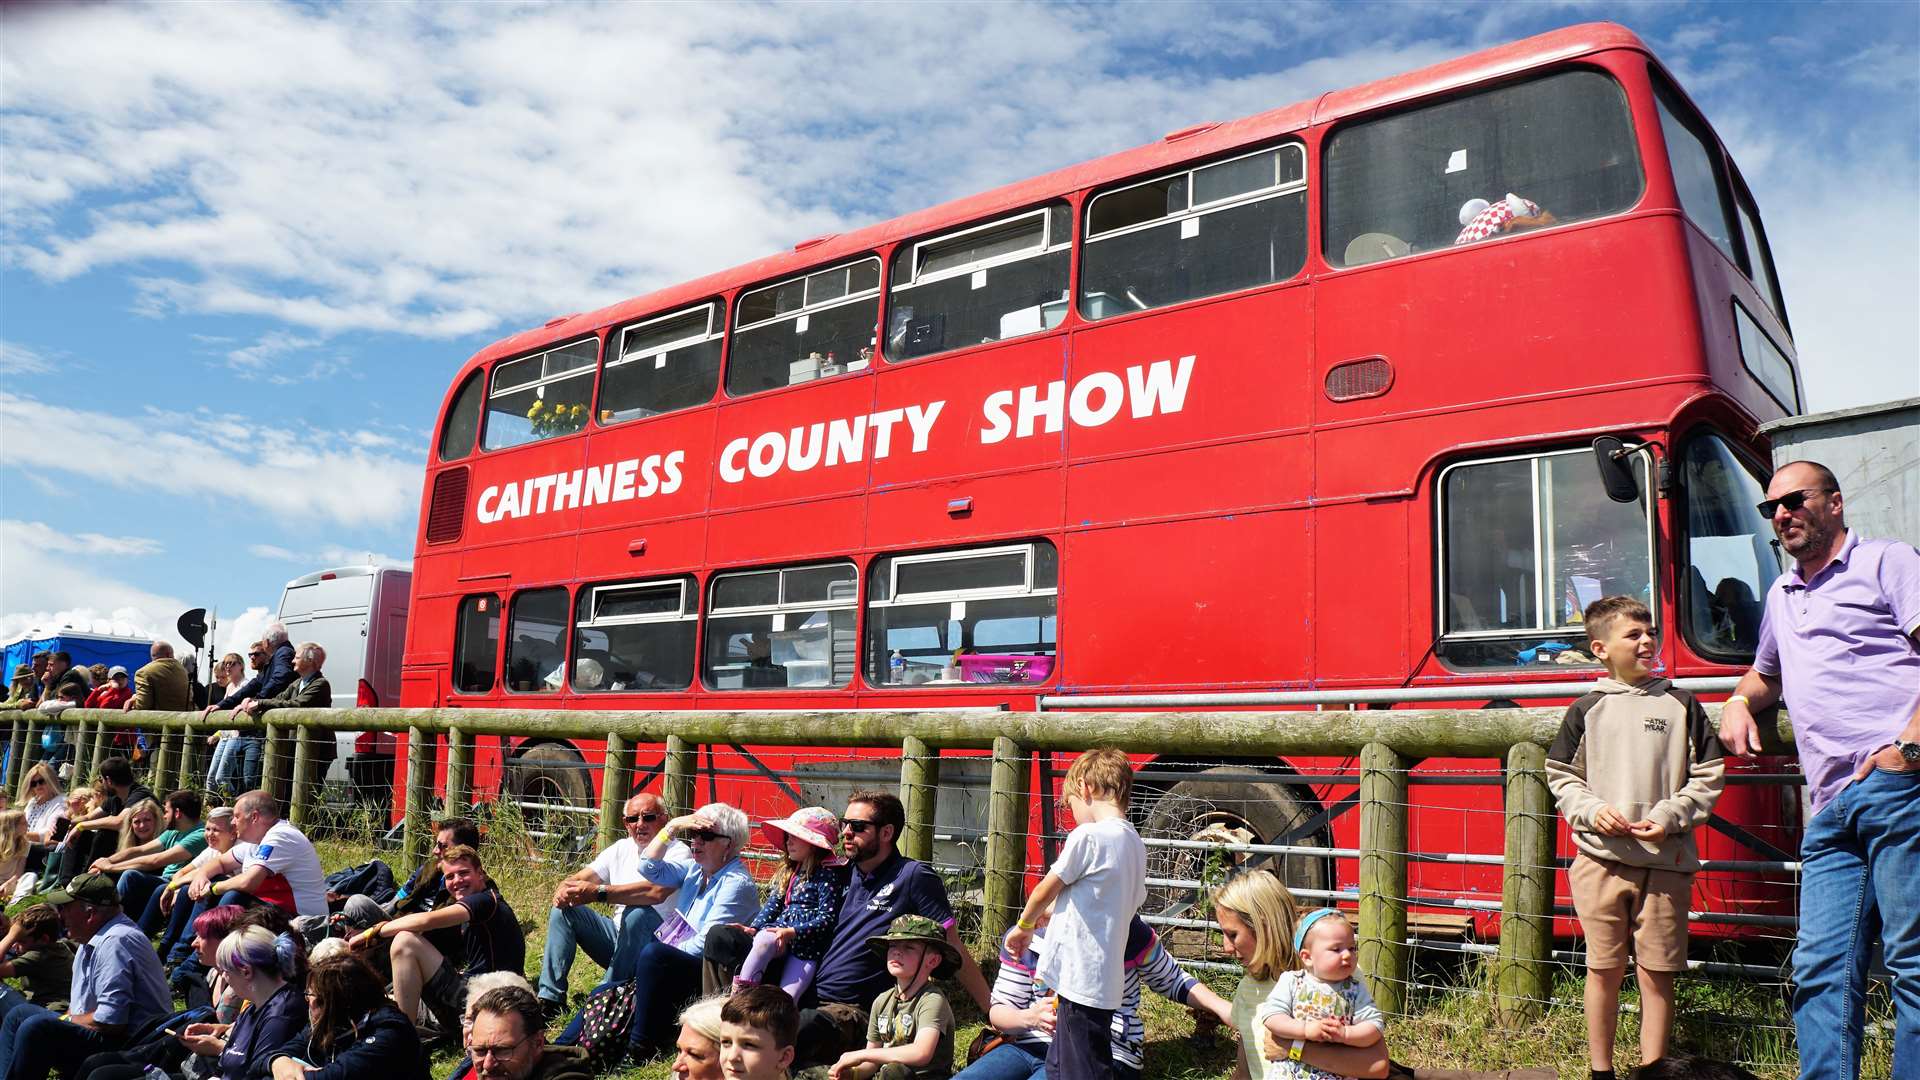 The County Show double decker bus is the main hub for the results on the day. Picture: DGS